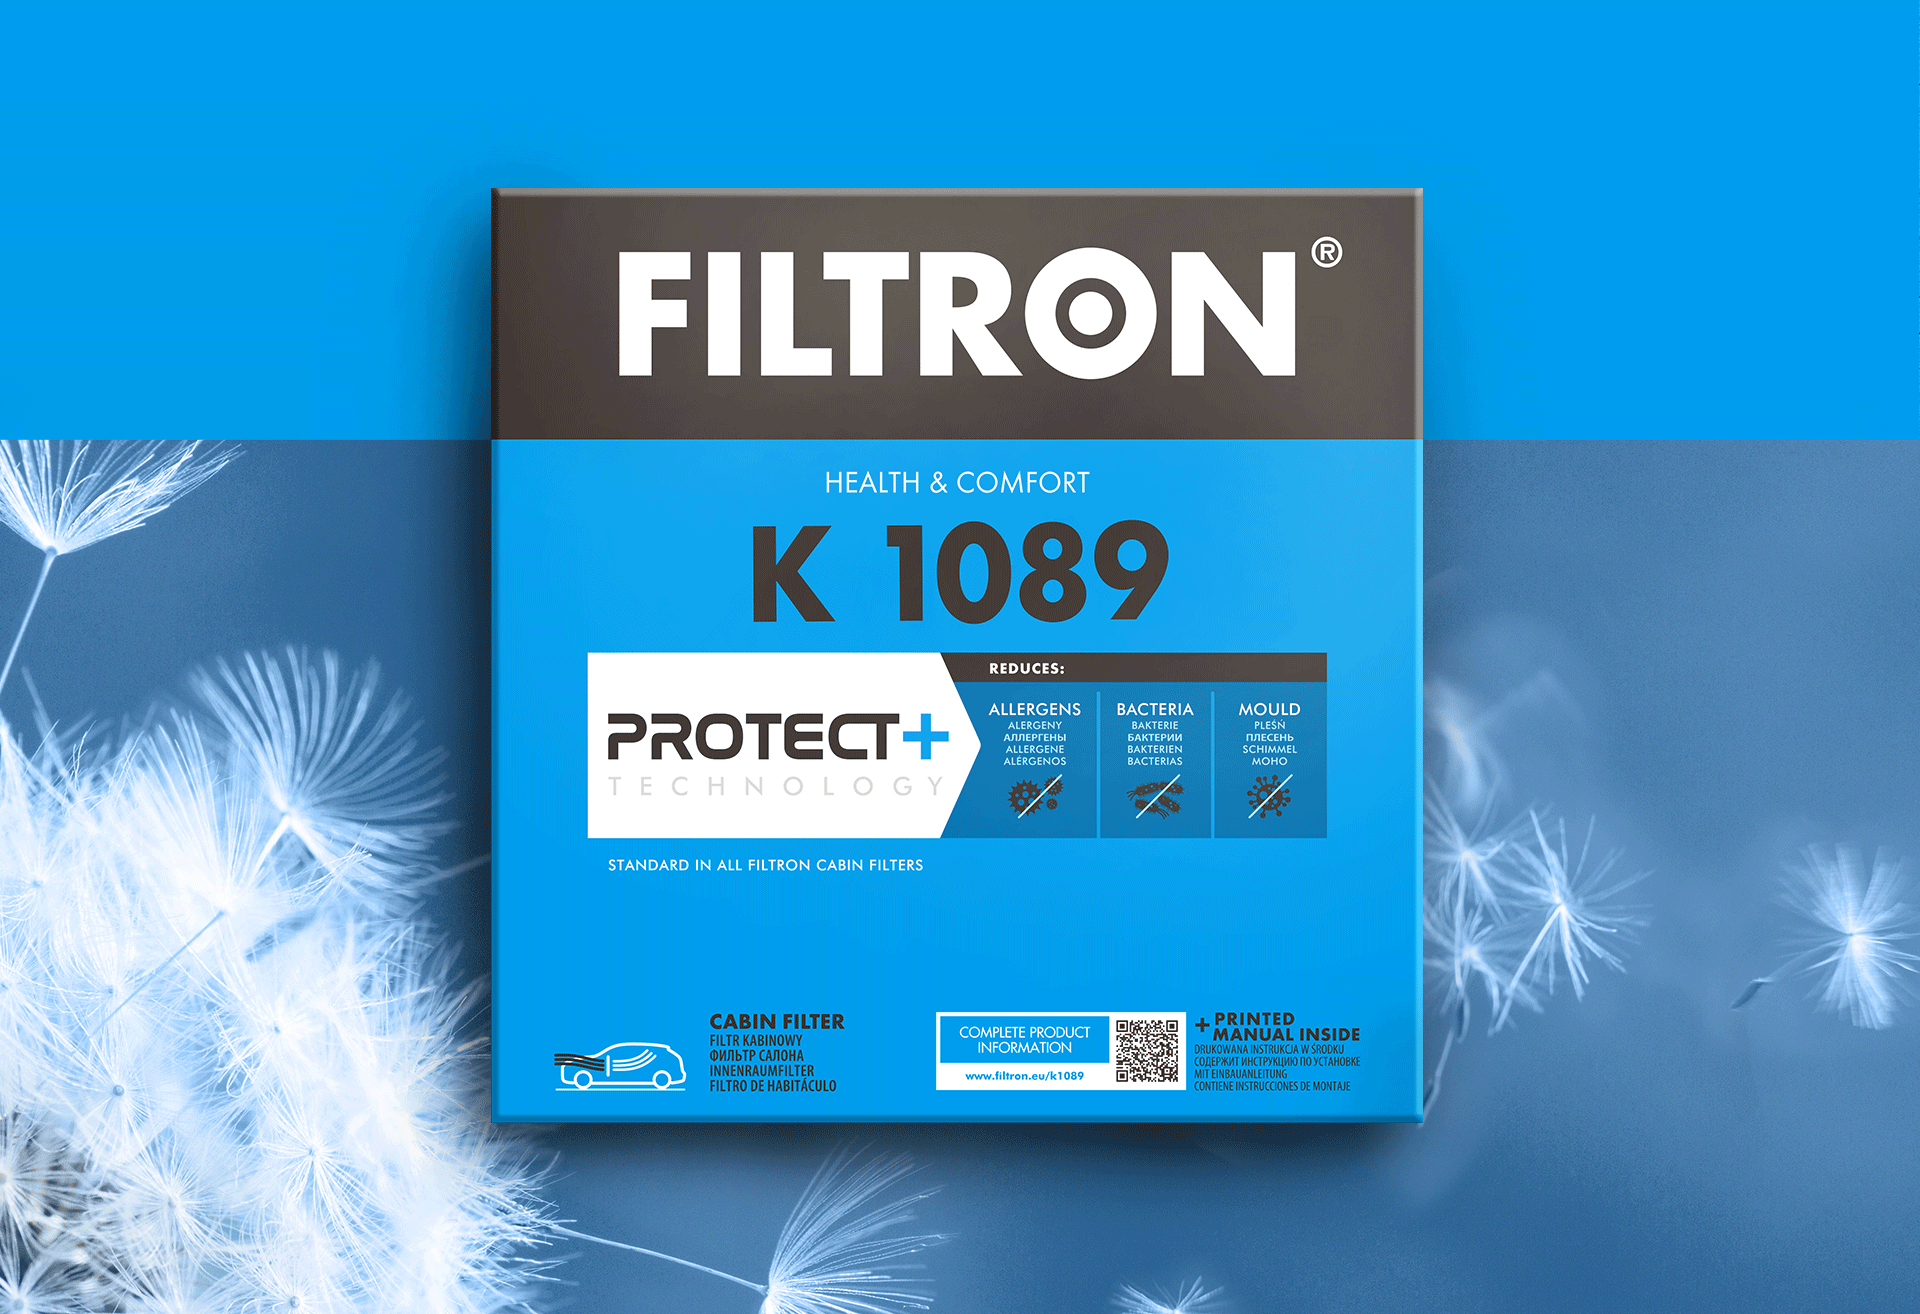 Filtron redesign - design of a new packaging for Filtron cabin filters.